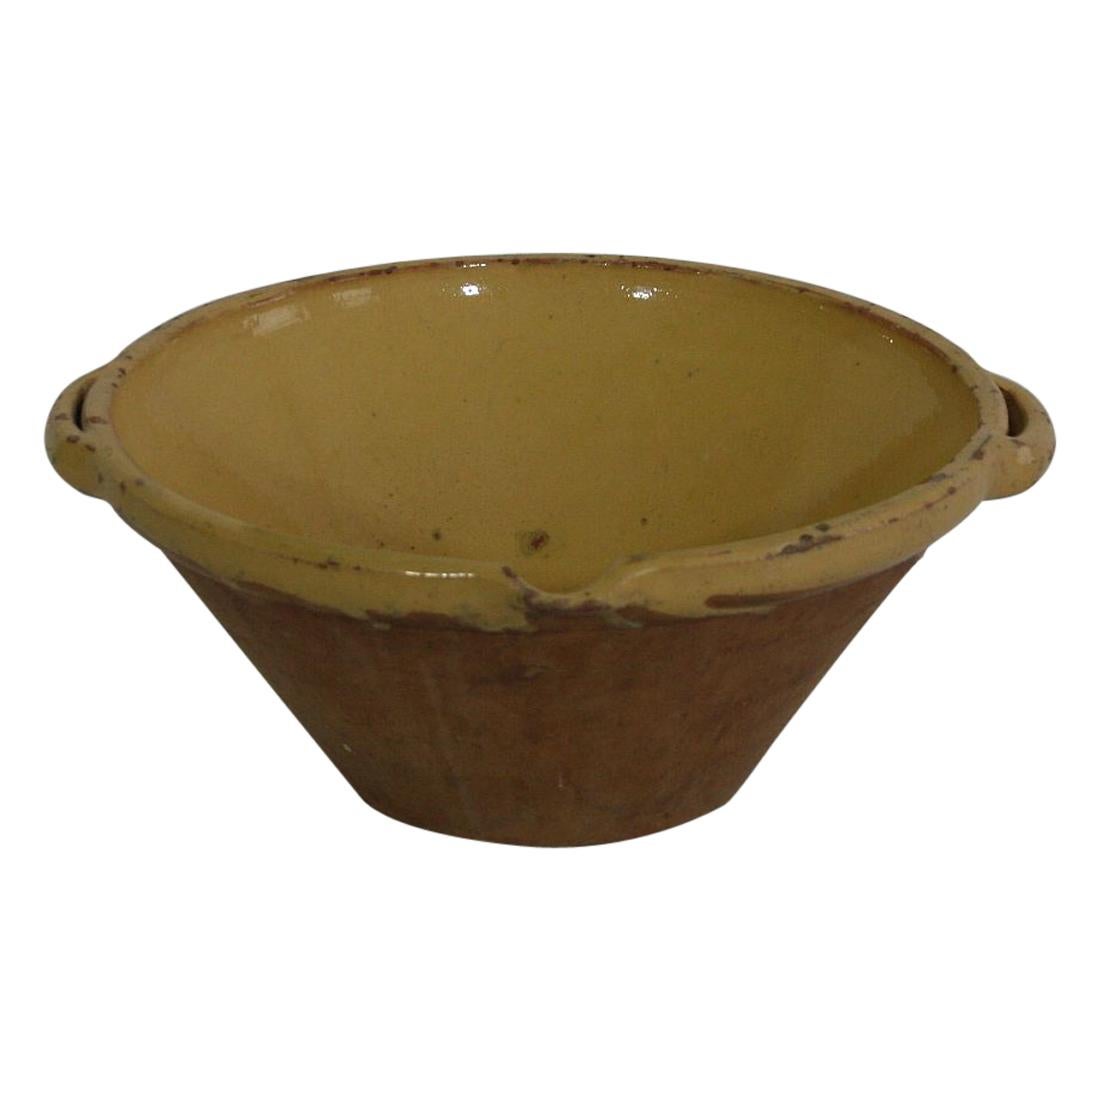 19th Century French Glazed Terracotta Dairy Bowl or Tian